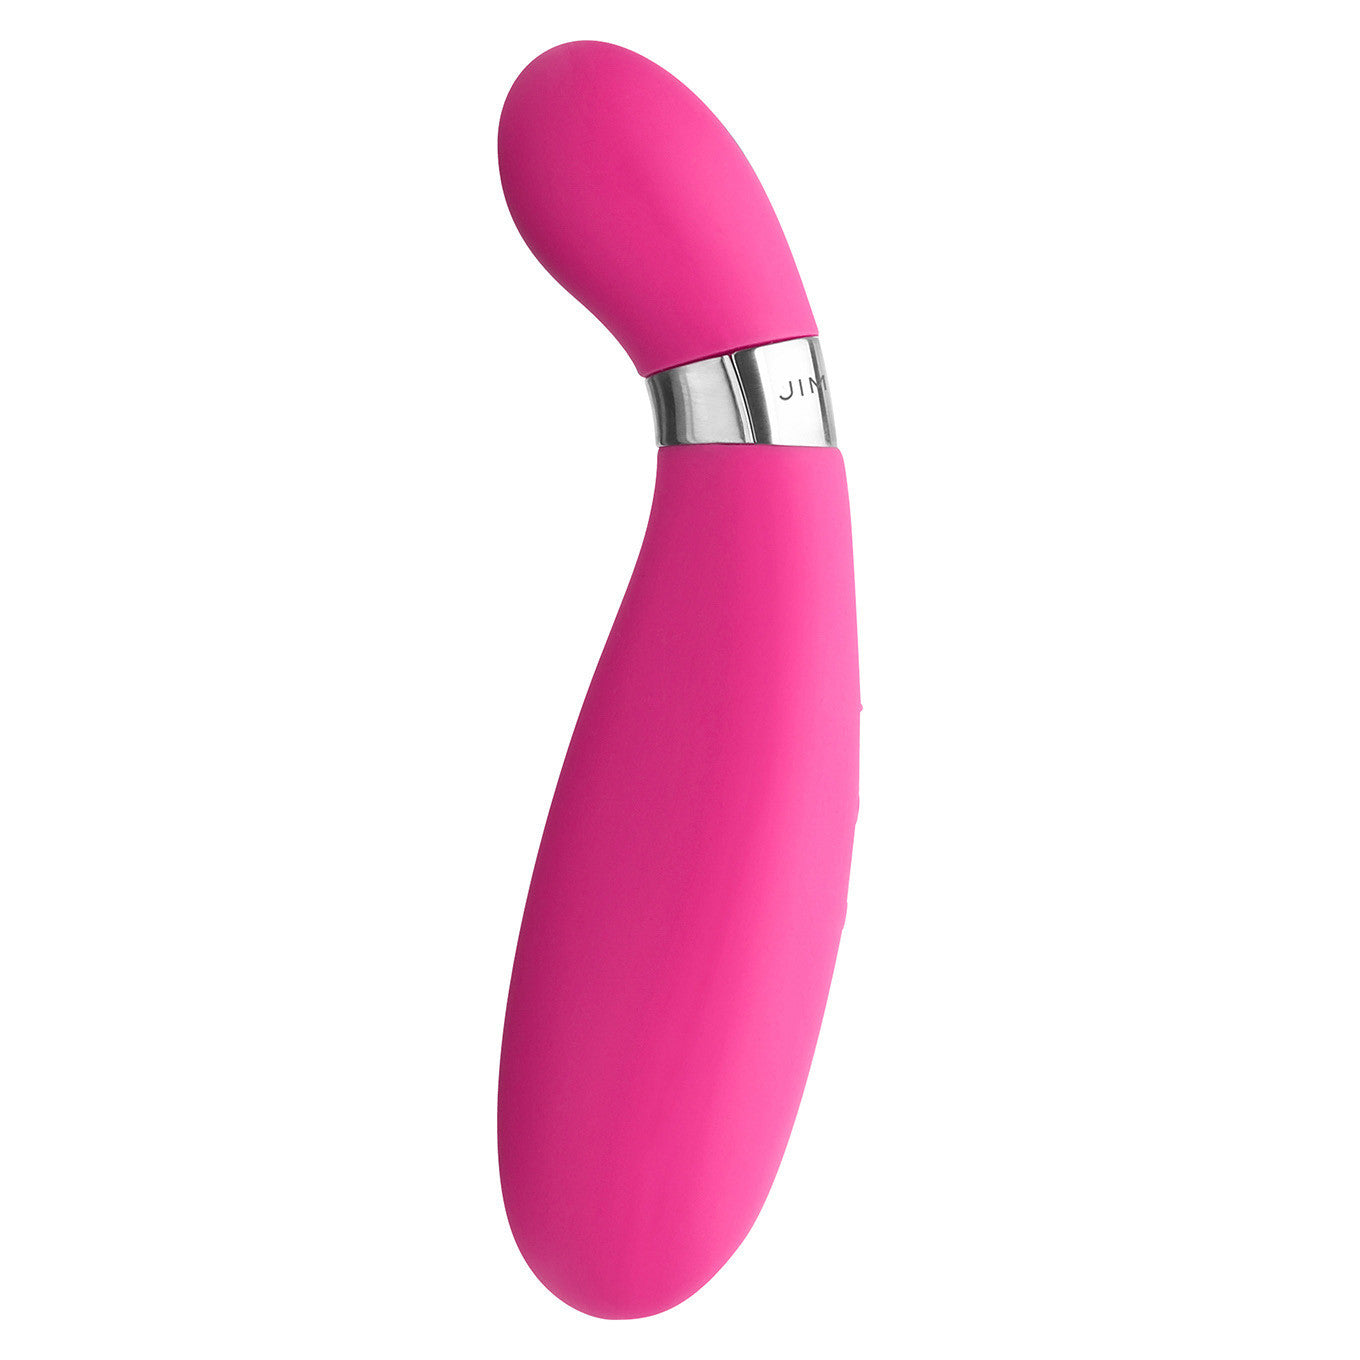 JimmyJane - Form 6 Waterproof Rechargeable Vibrator (Pink) -  G Spot Dildo (Vibration) Rechargeable  Durio.sg